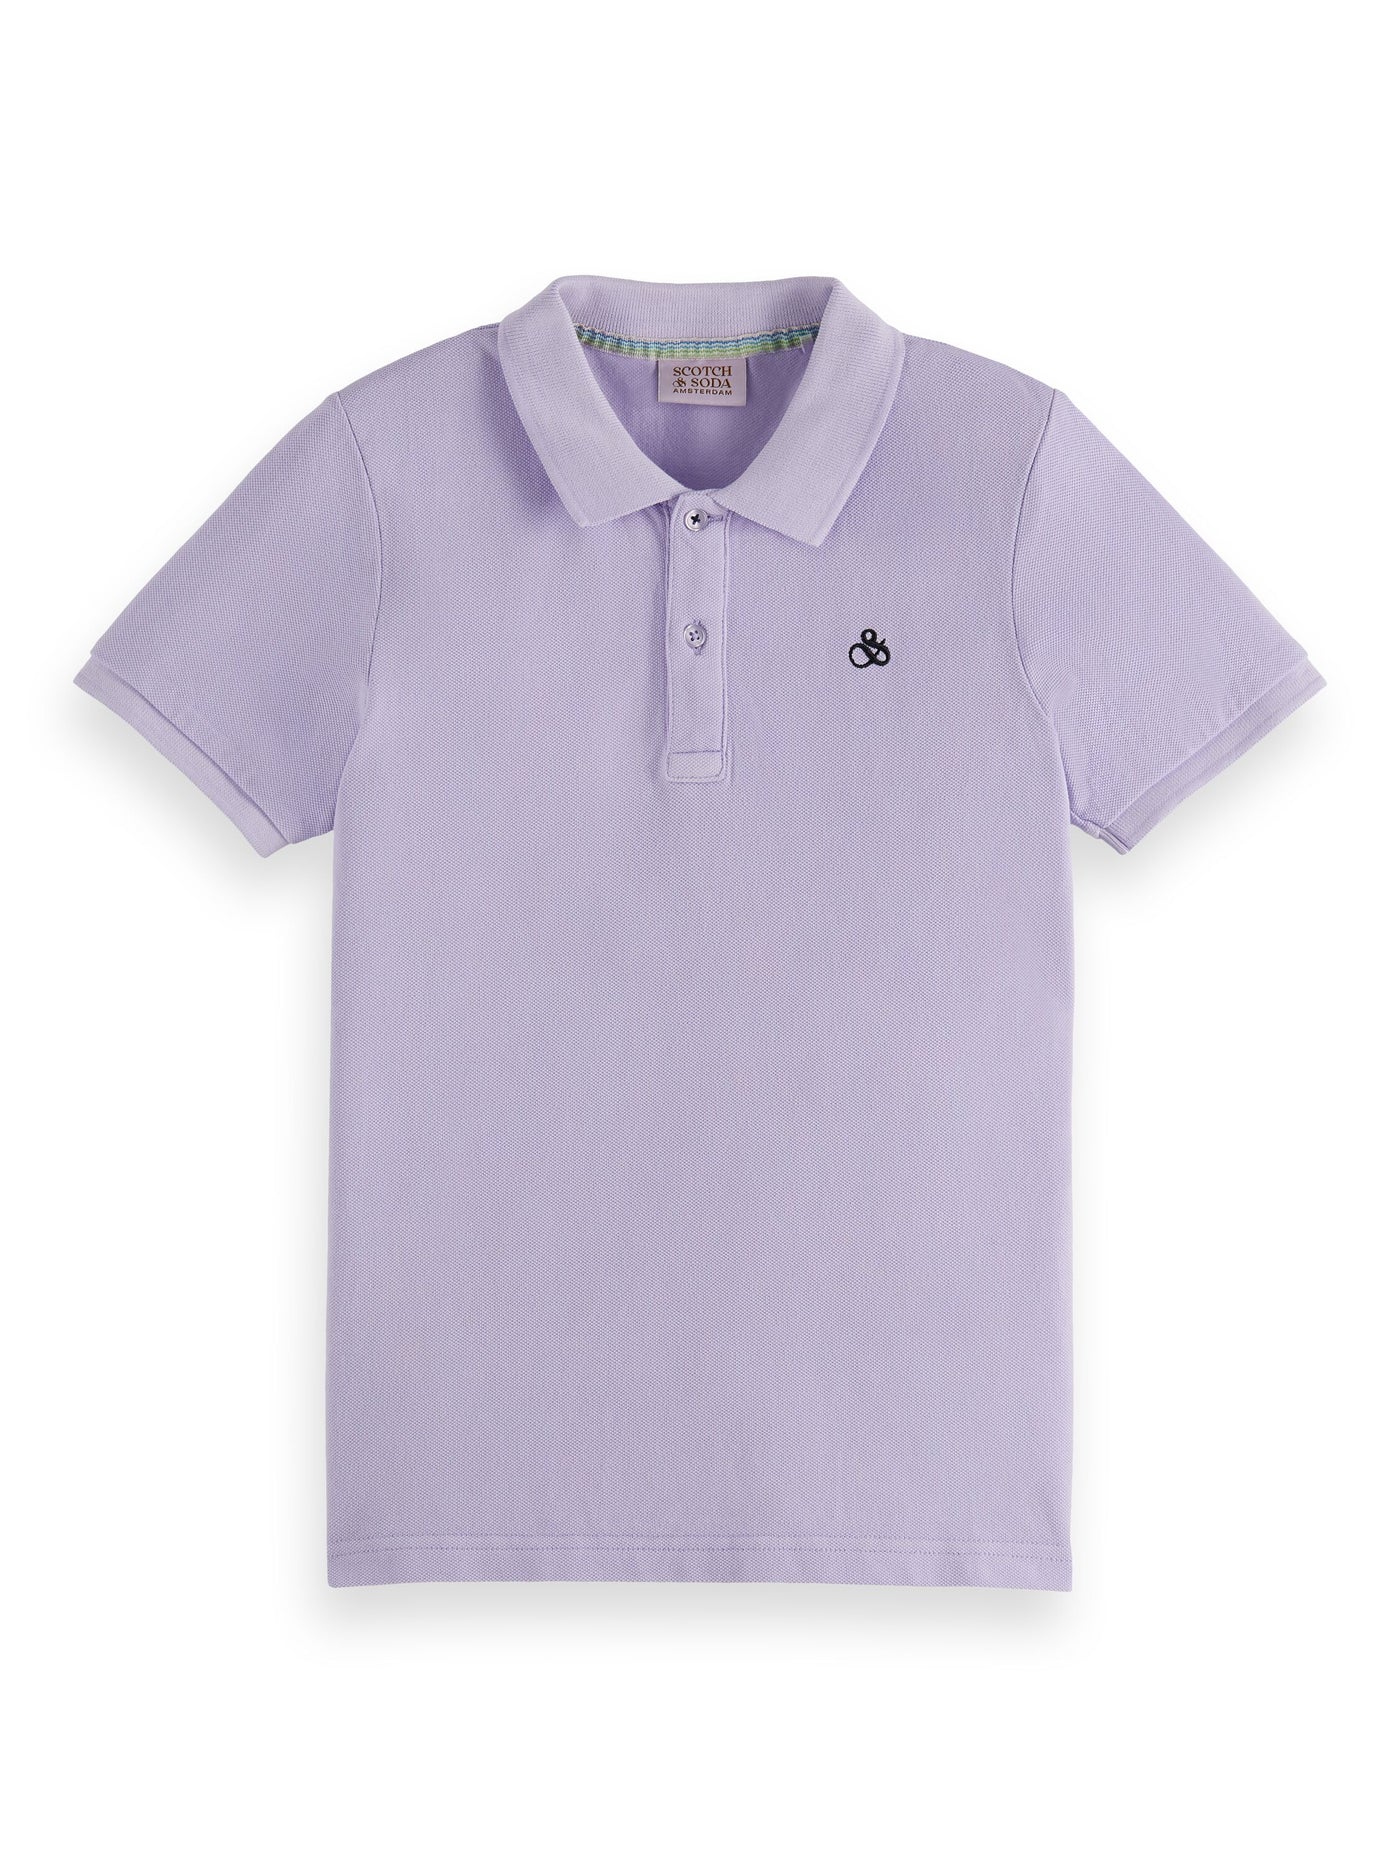 Garment Dyed Short Sleeved Pique Polo